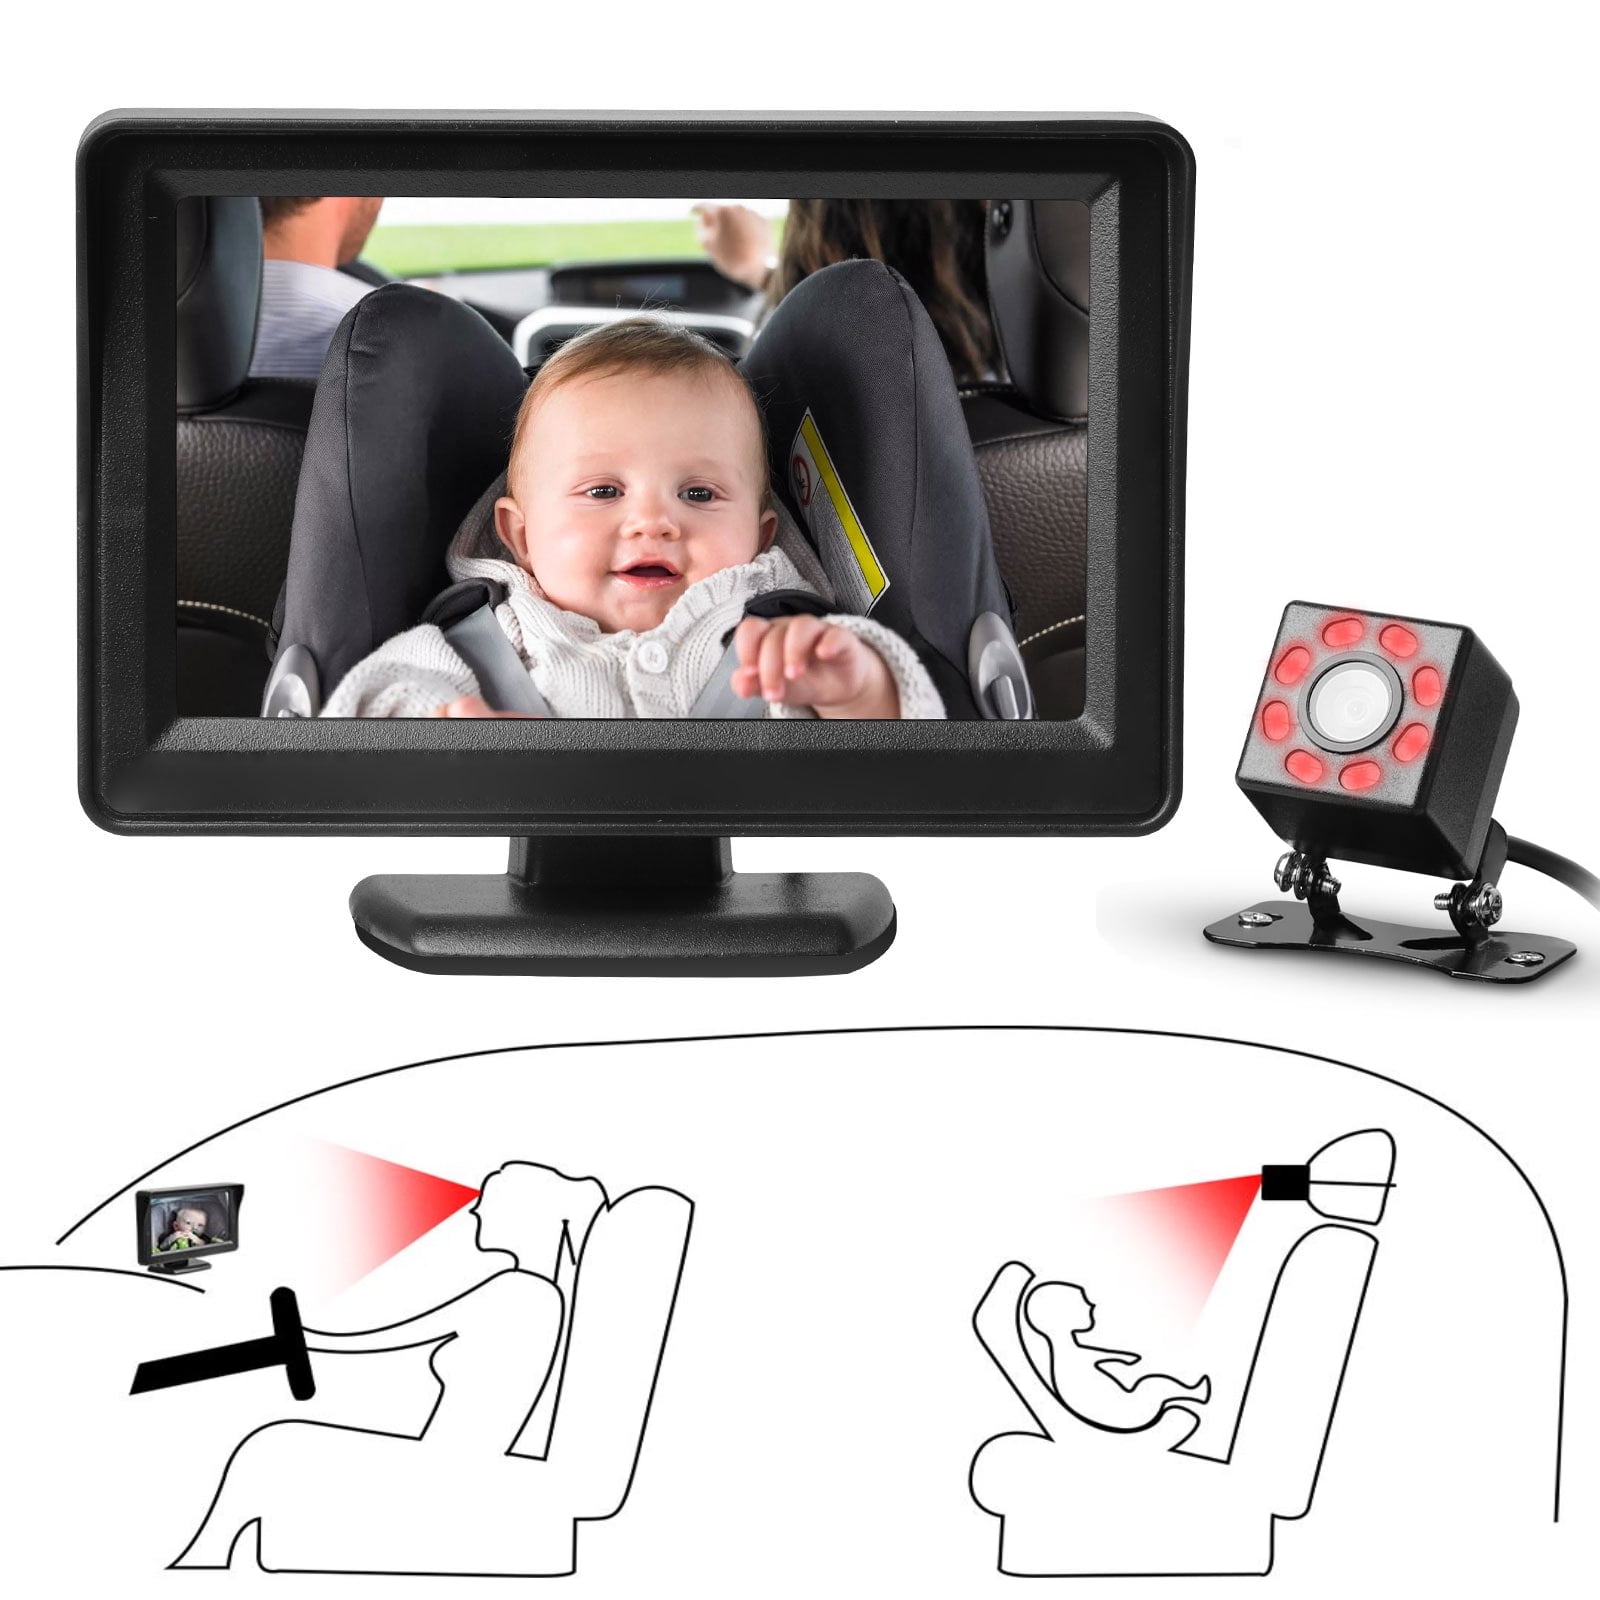 Baby HD foldable car rea view camera & LCD – the useful item